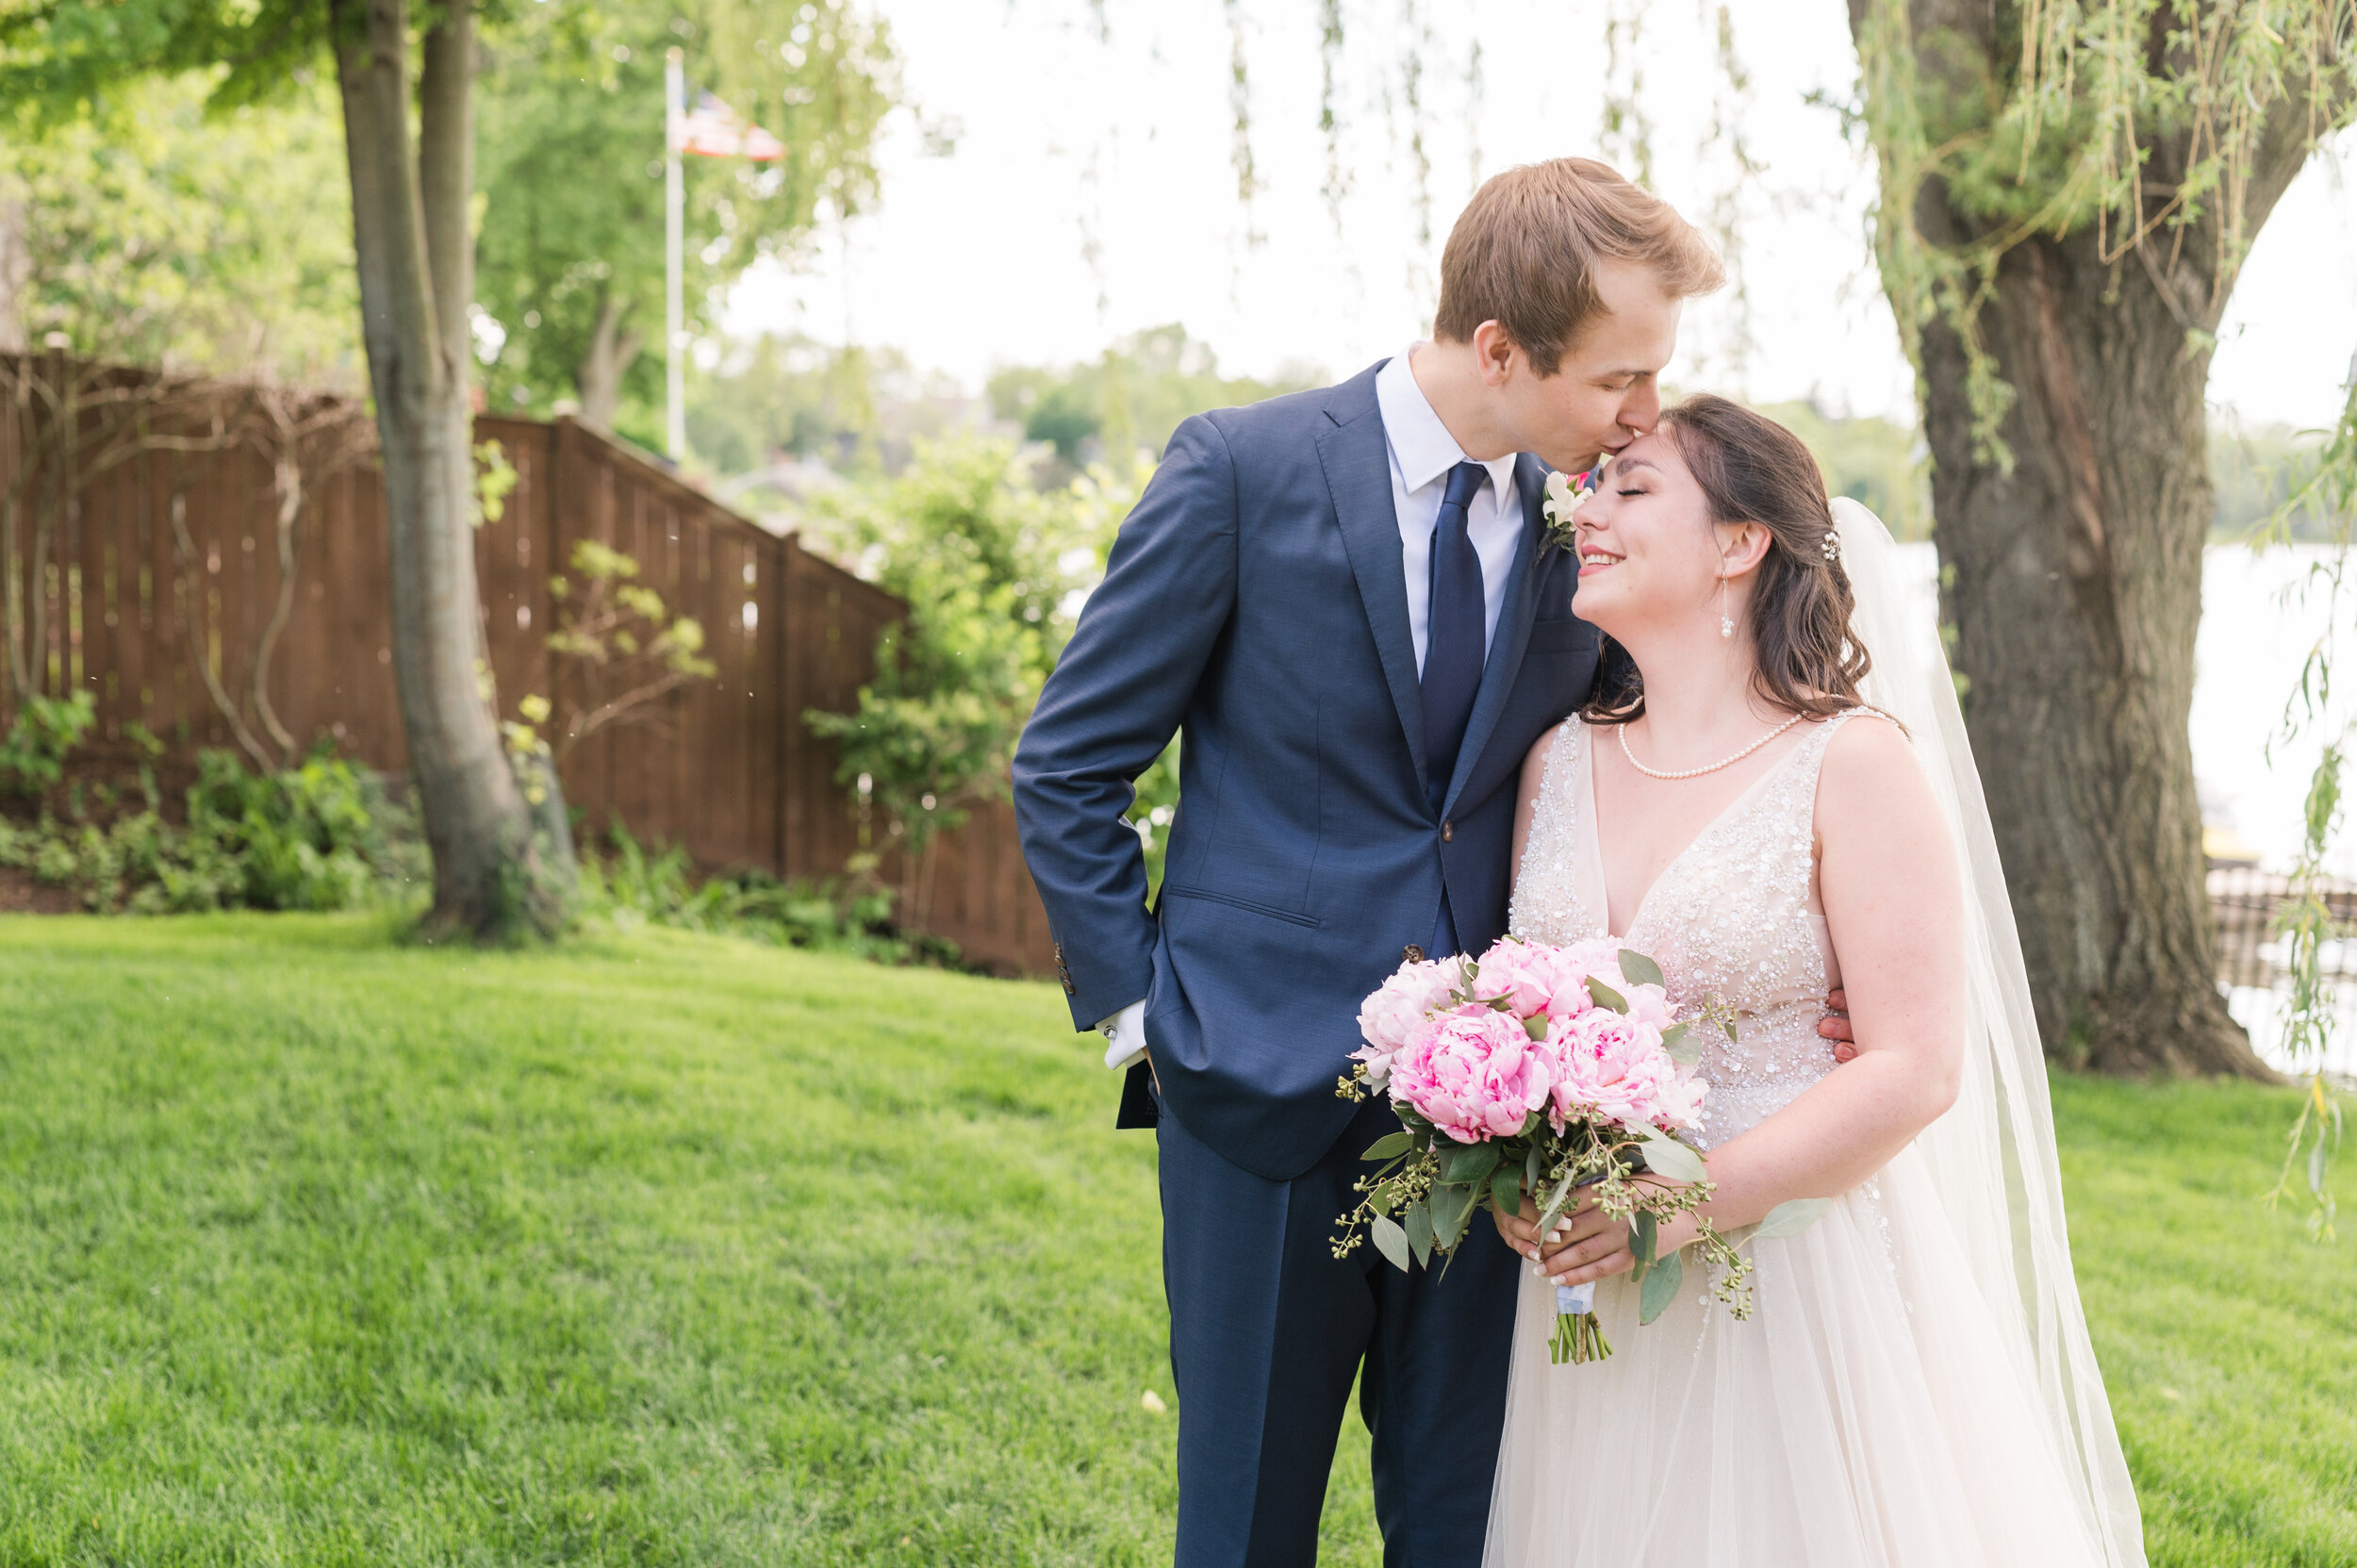 Intimate Round Lake, Illinois Elopement captured by Winterlyn Photography